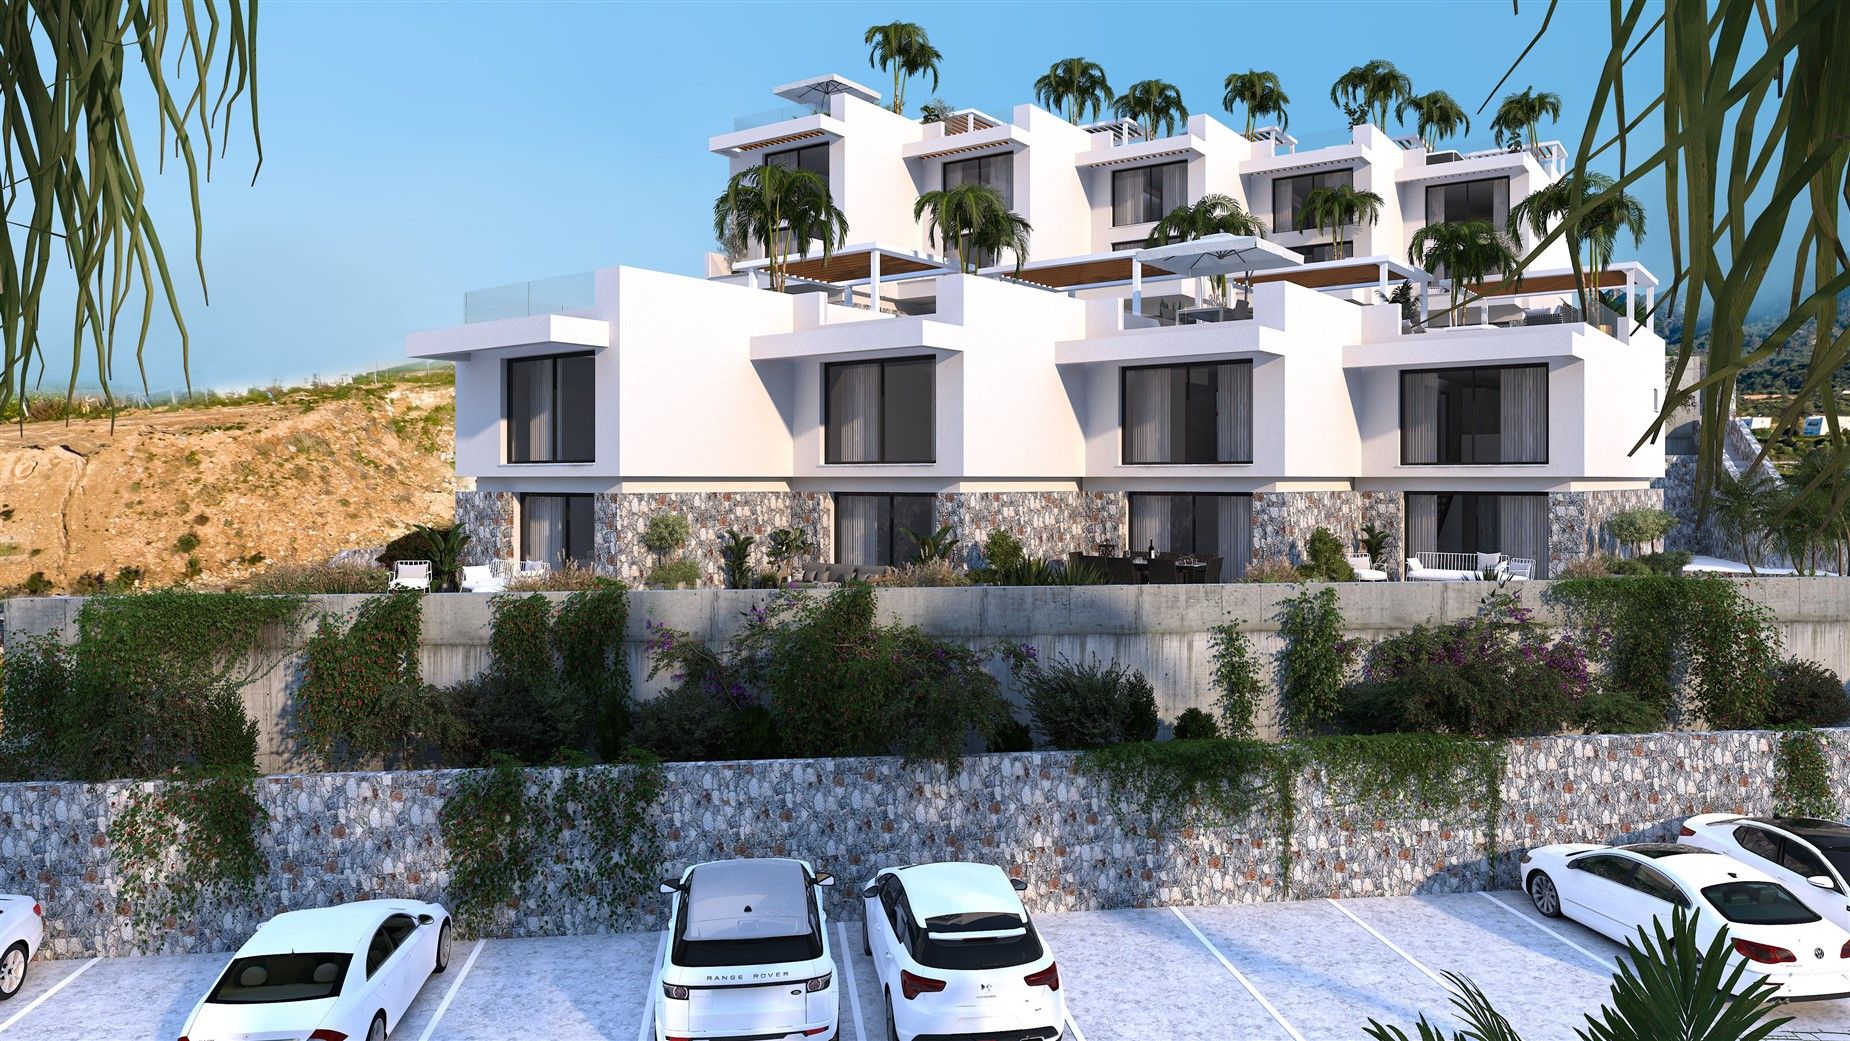 New apartments of different types by the sea in North Cyprus